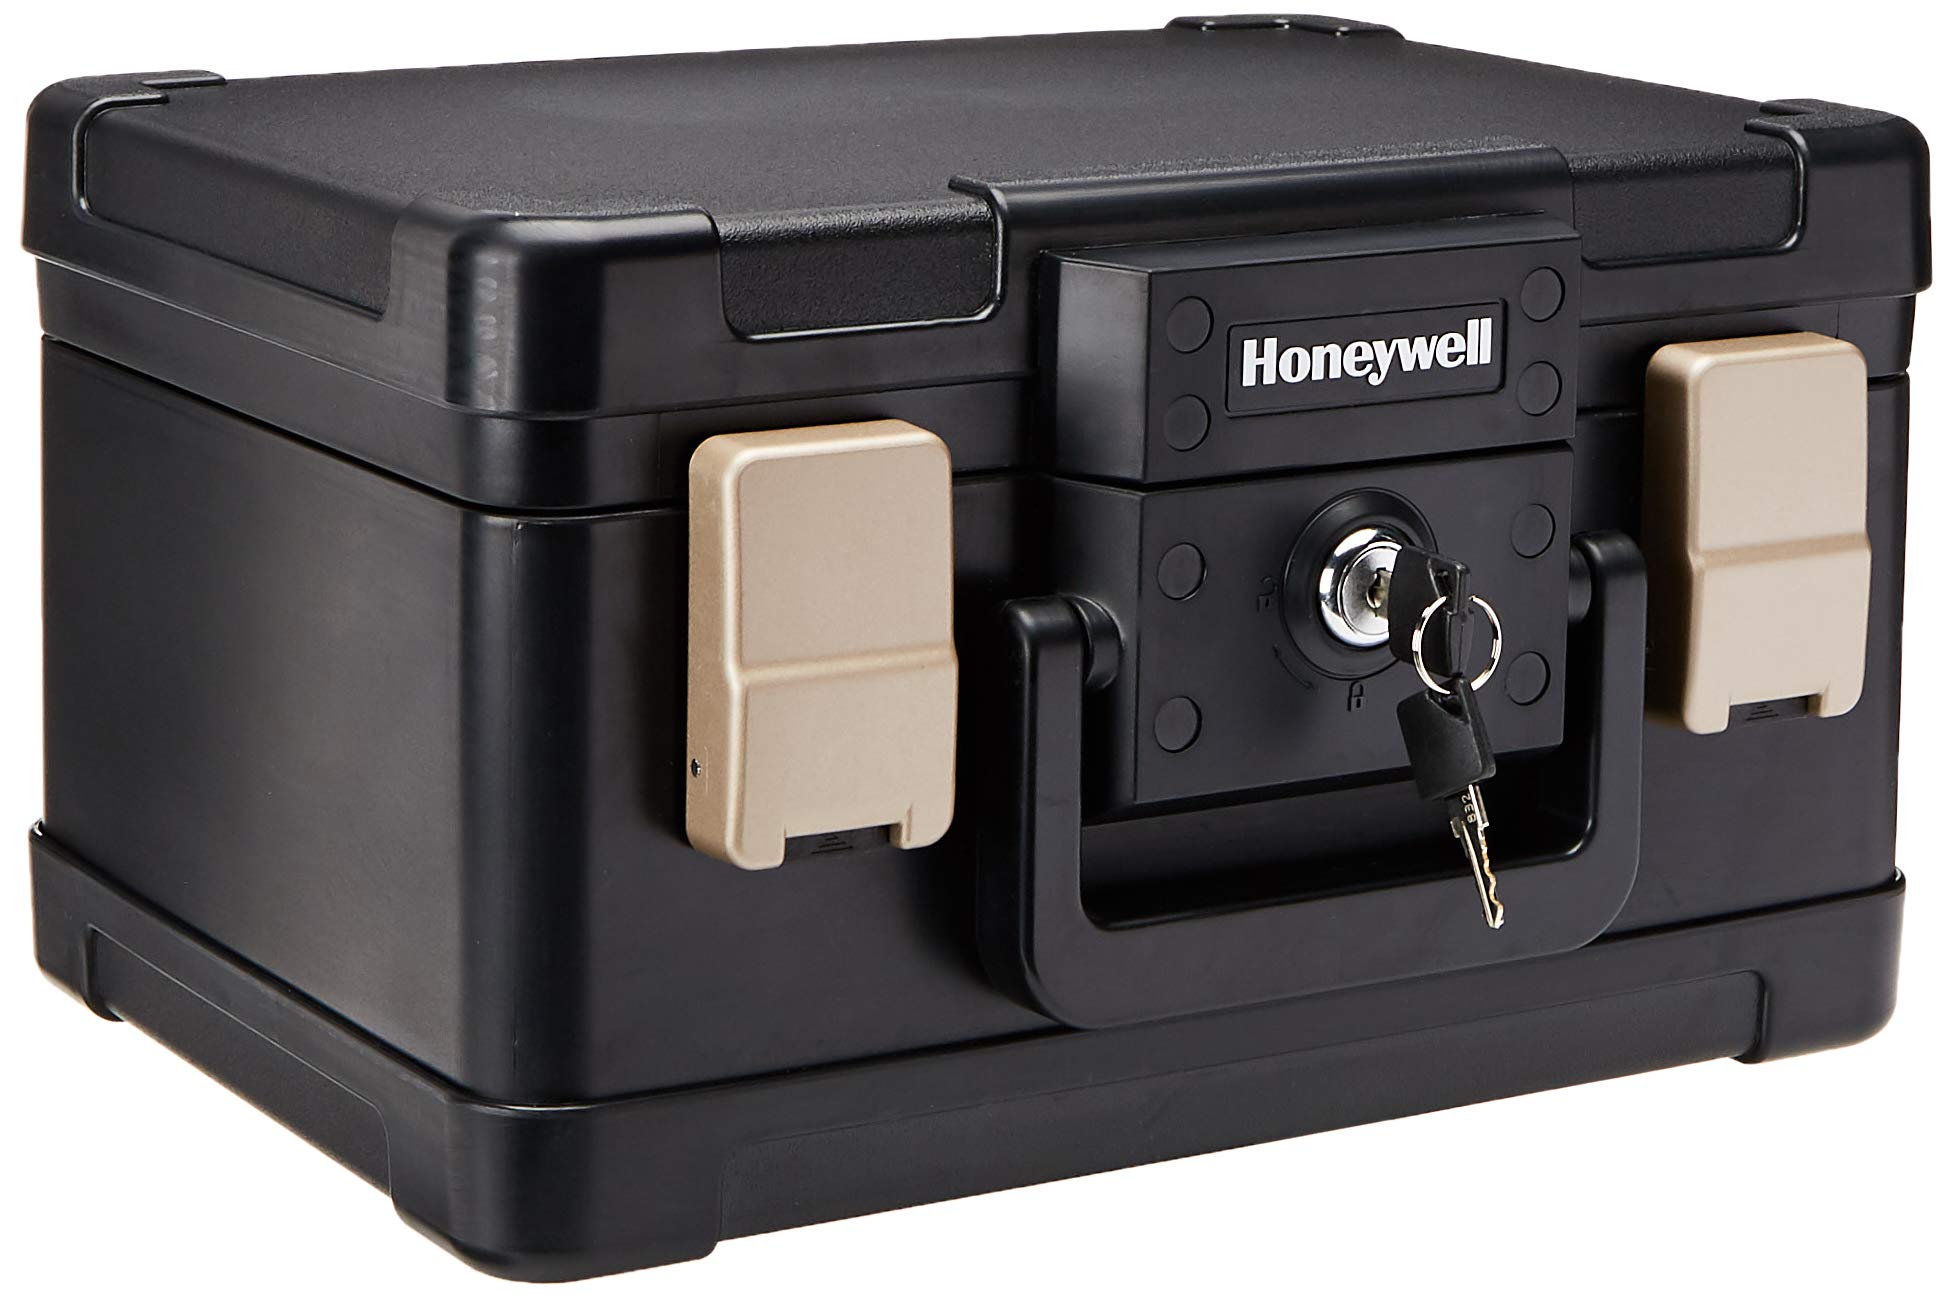 Honeywell Safes & Door Locks - 30 Minute Fire Safe Waterproof Safe Box Chest with Carry Handle, Small, 1102